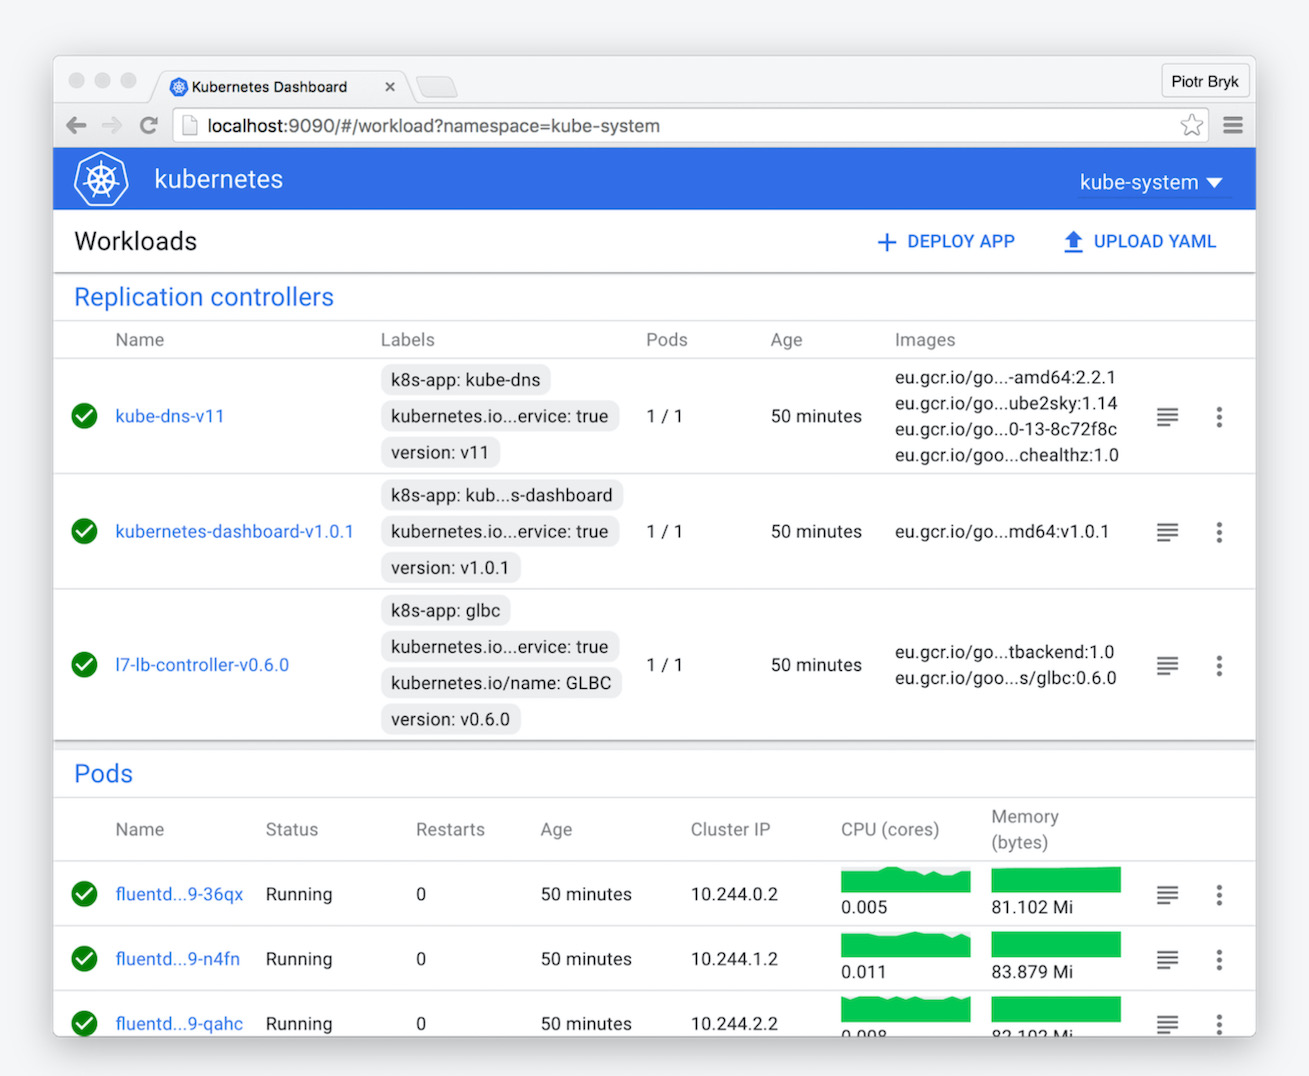 Replications controllers on the Kubernetes Dashboard